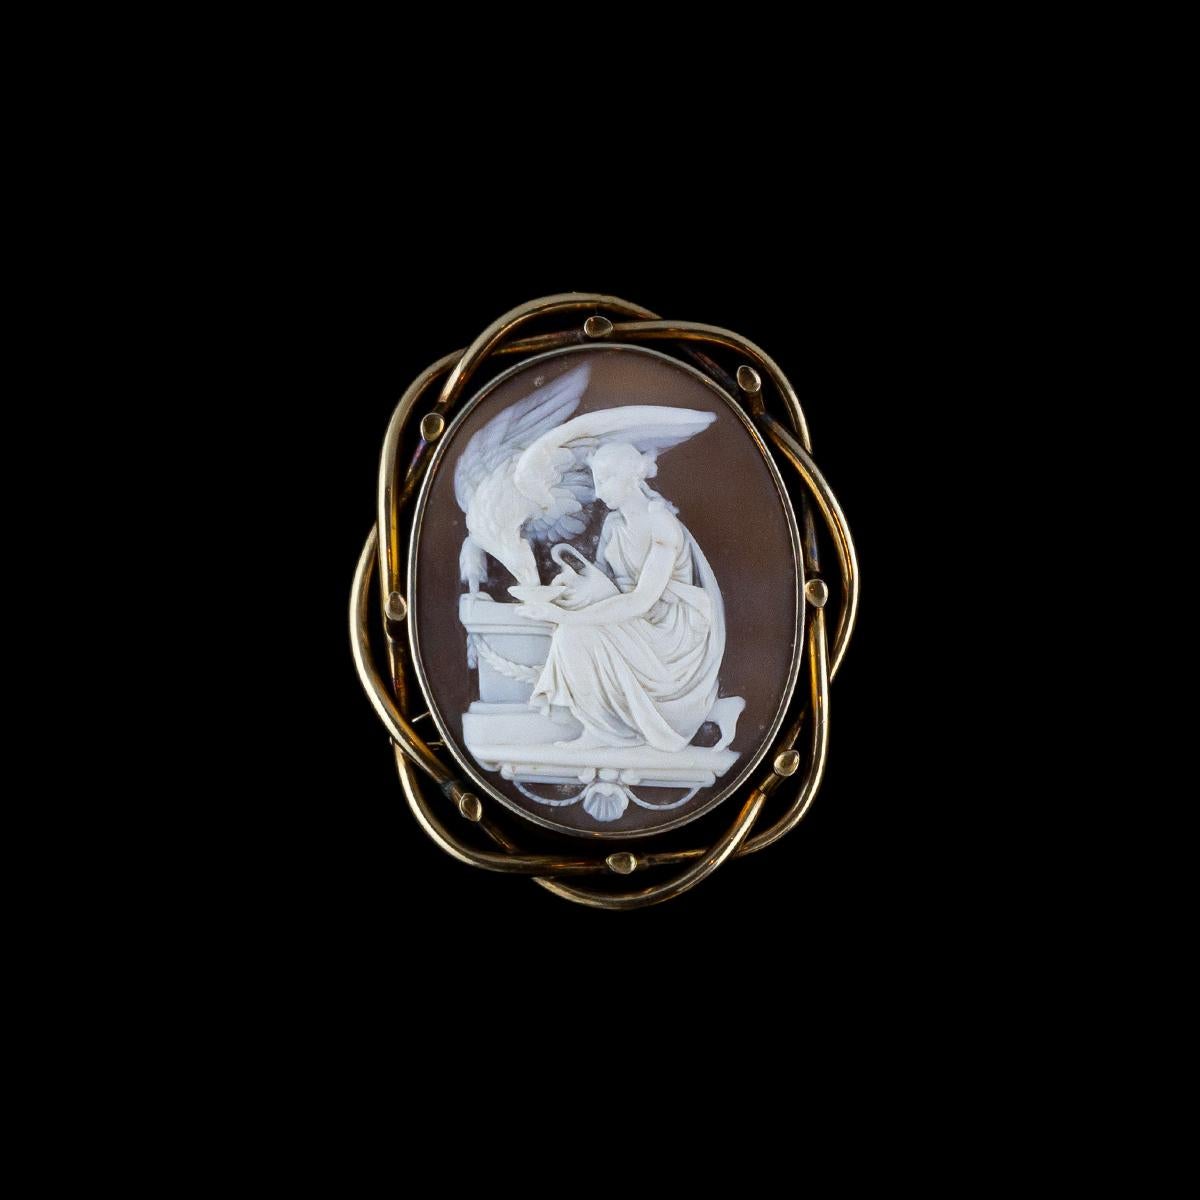 Antique Victorian brooch with cameo depicting goddess Ebe with Zeus transformed into an eagle in a beautiful 15 kt yellow gold carved frame.
The goddess Ebe in Greek mythology is the bright and laughing deity of youth, daughter of Zeus and Hera.
Her